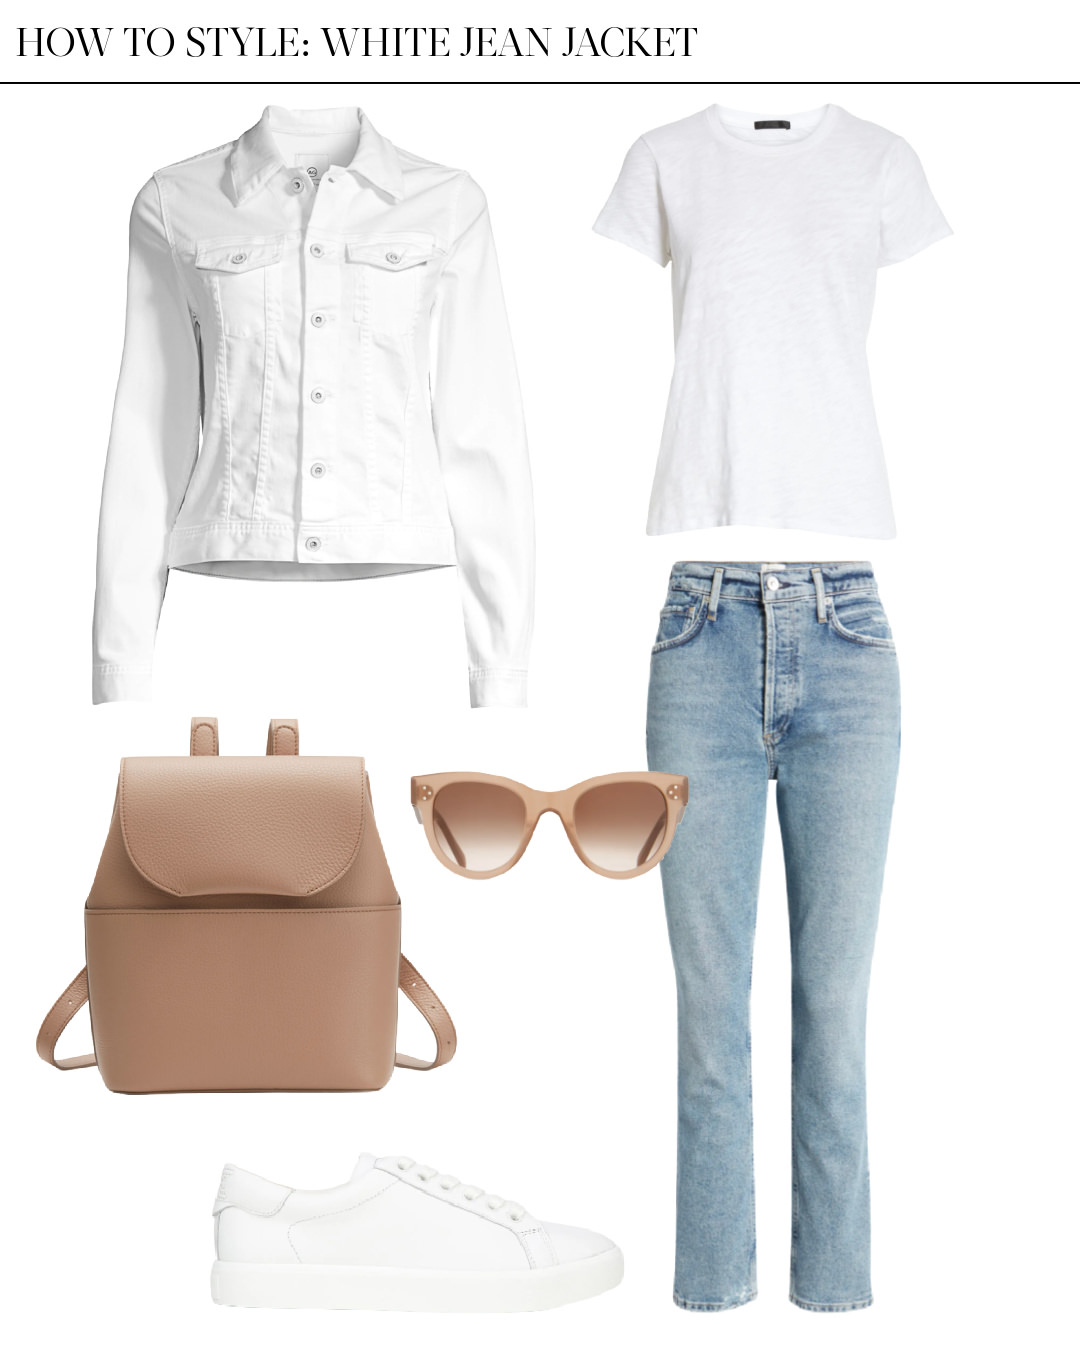 casual white jean jacket outfit with tshirt and jeans